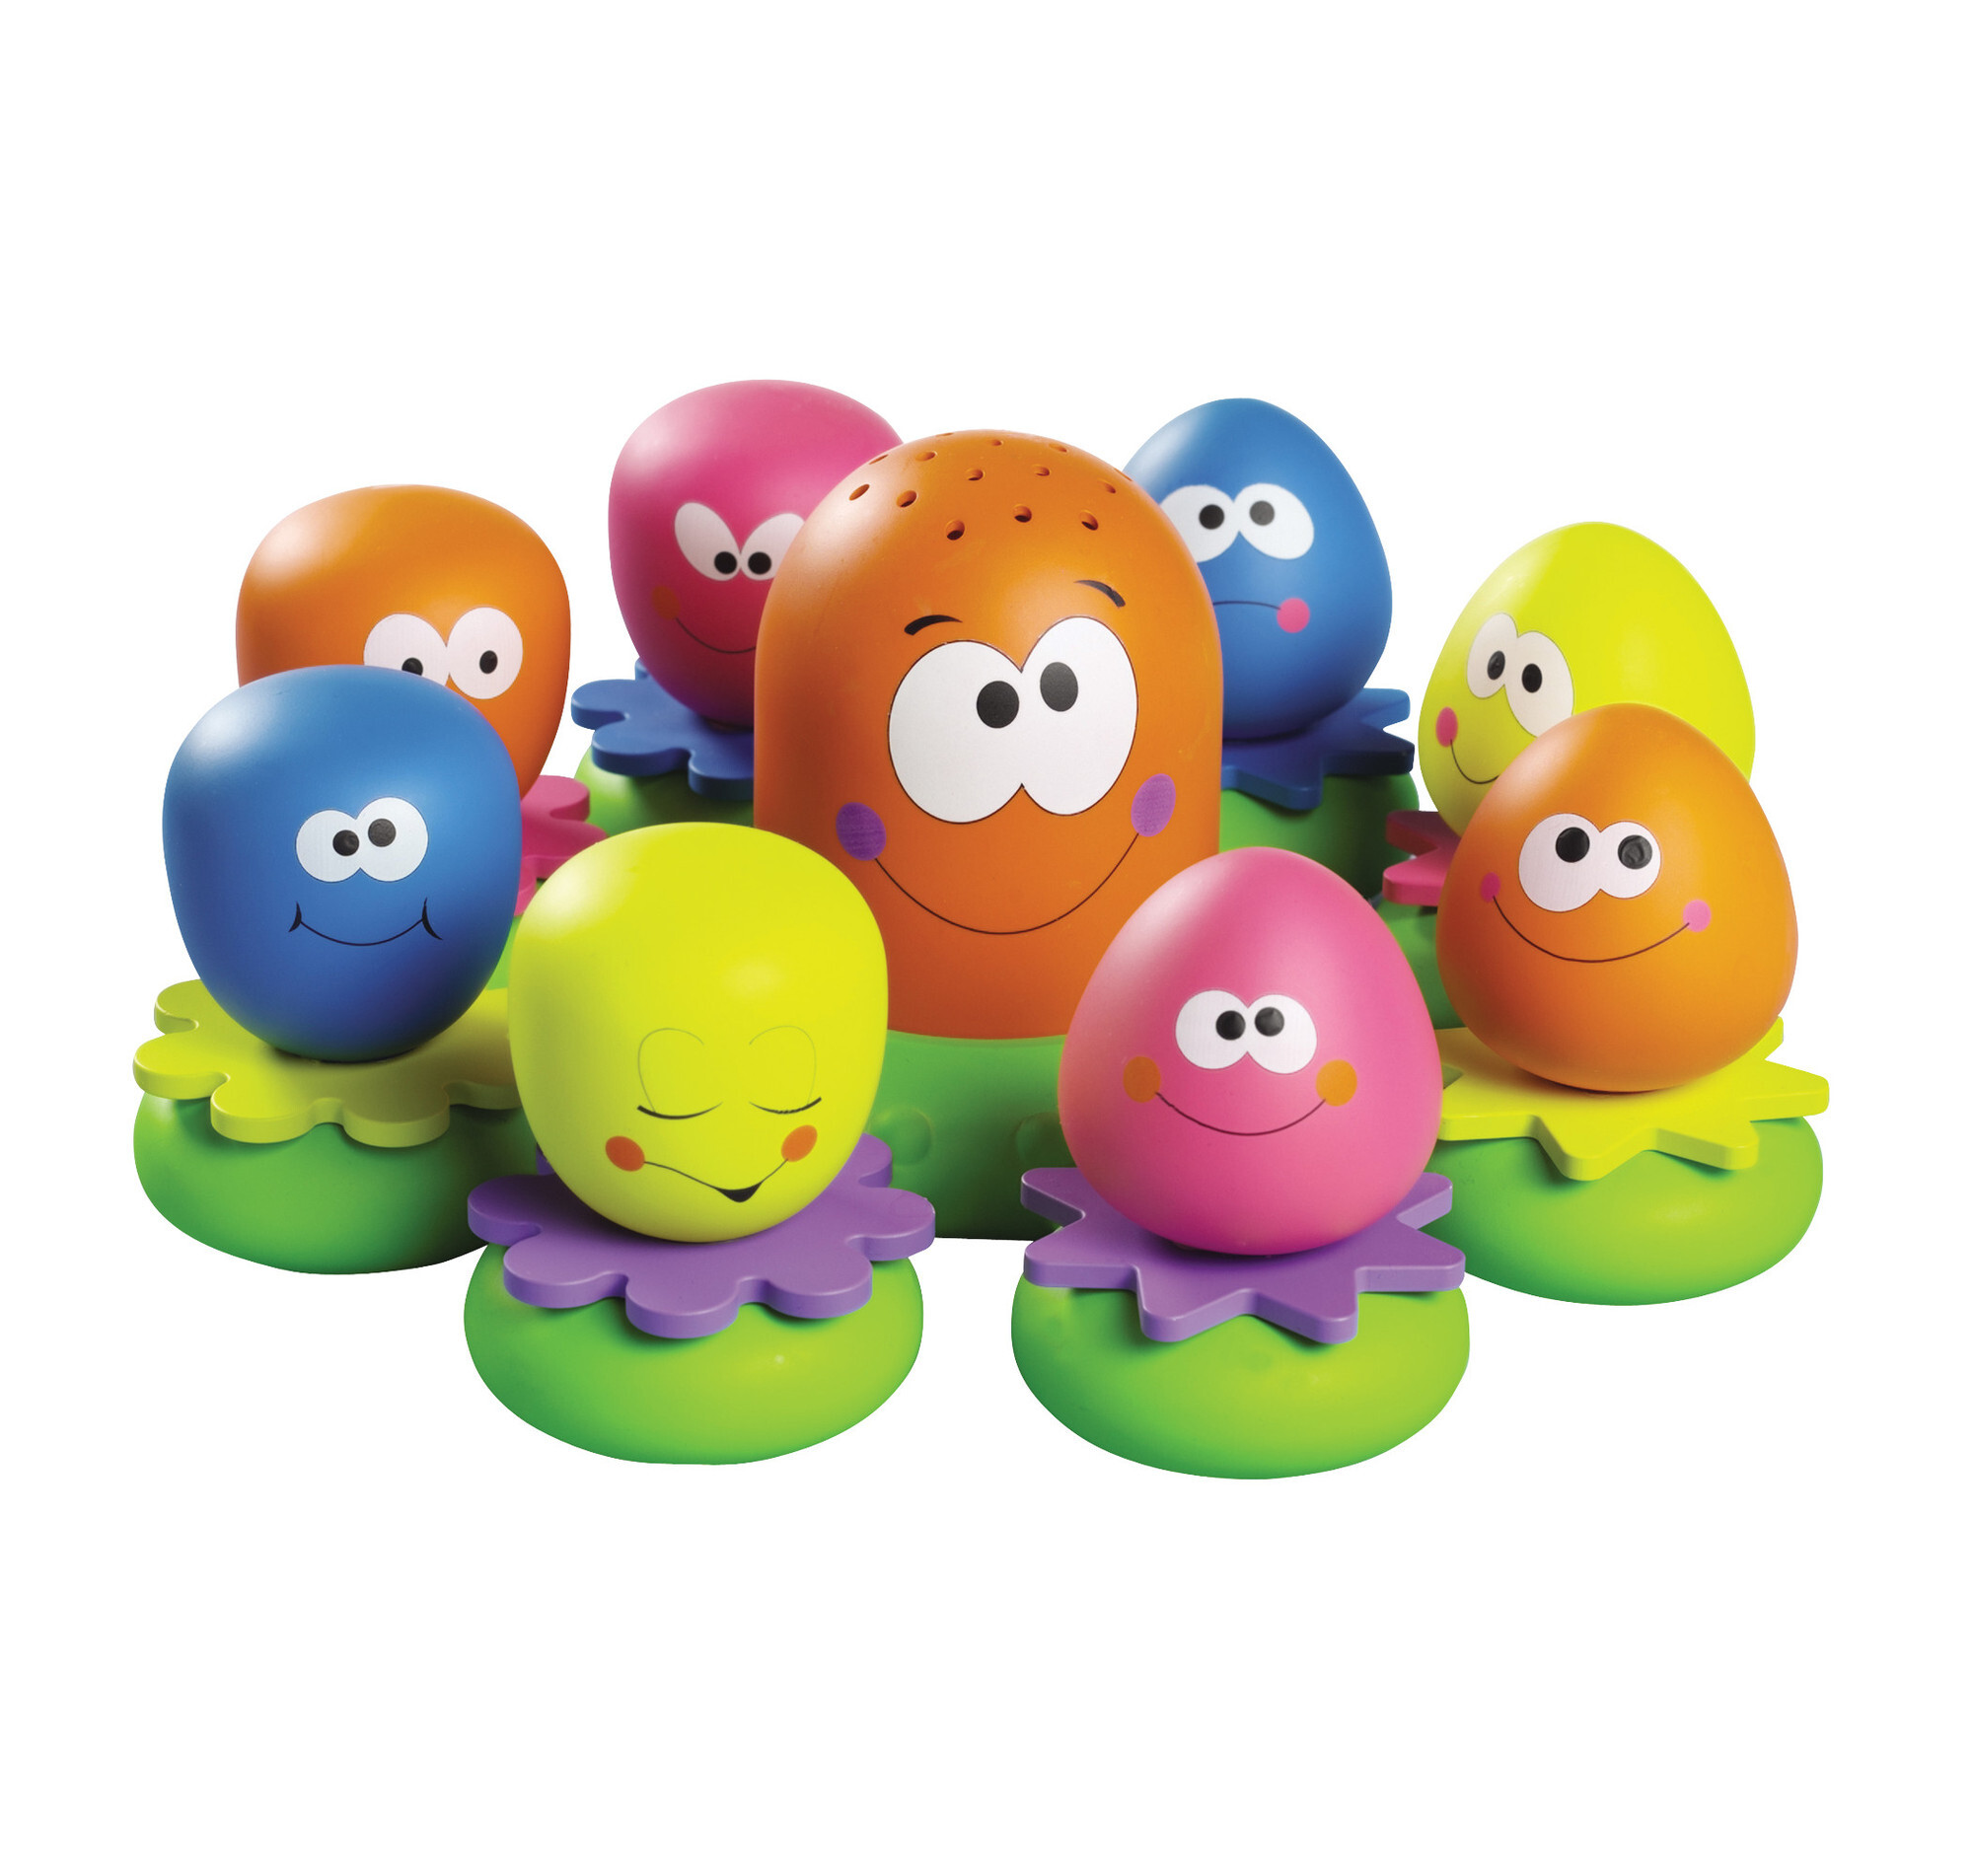 Tomy Octopus Familie